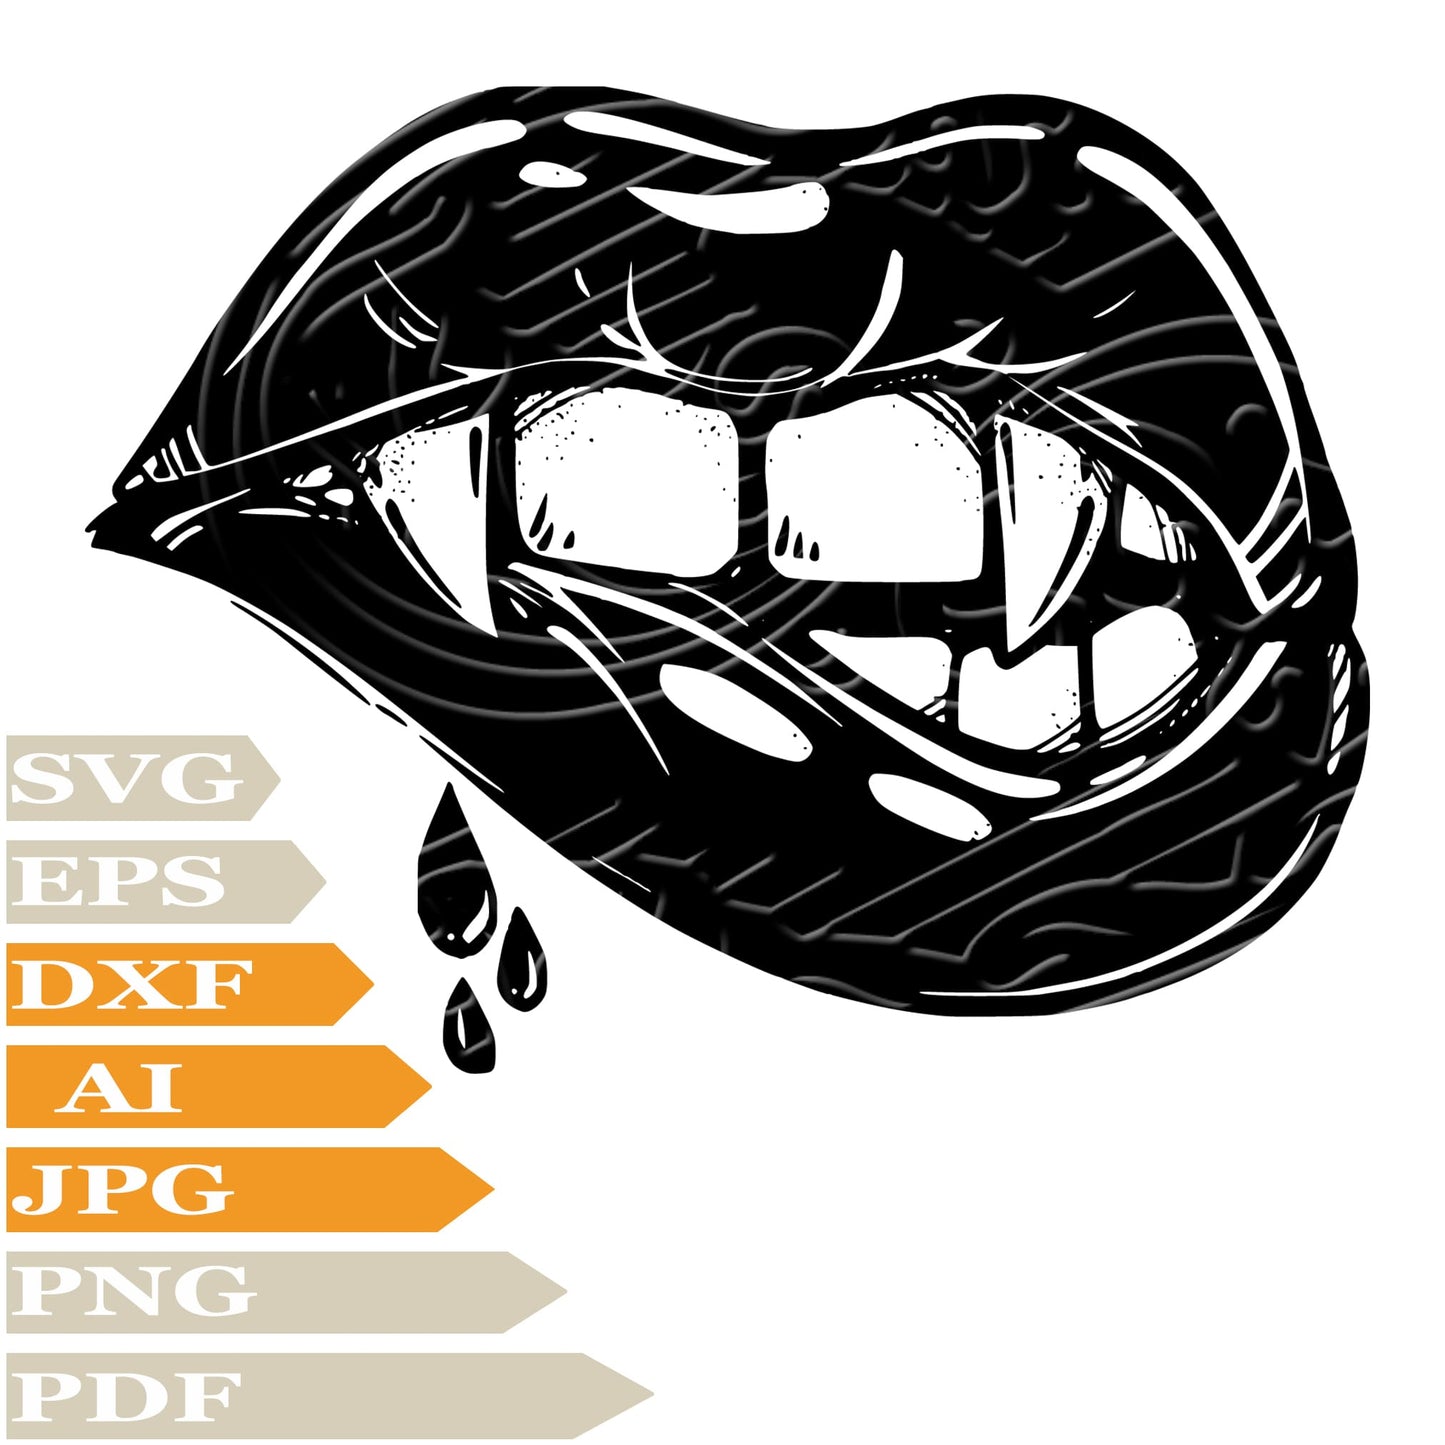 Lips, Vampire Lips Svg File, Image Cut, Png, For Tattoo, Silhouette, Digital Vector Download, Cut File, Clipart, For Cricut